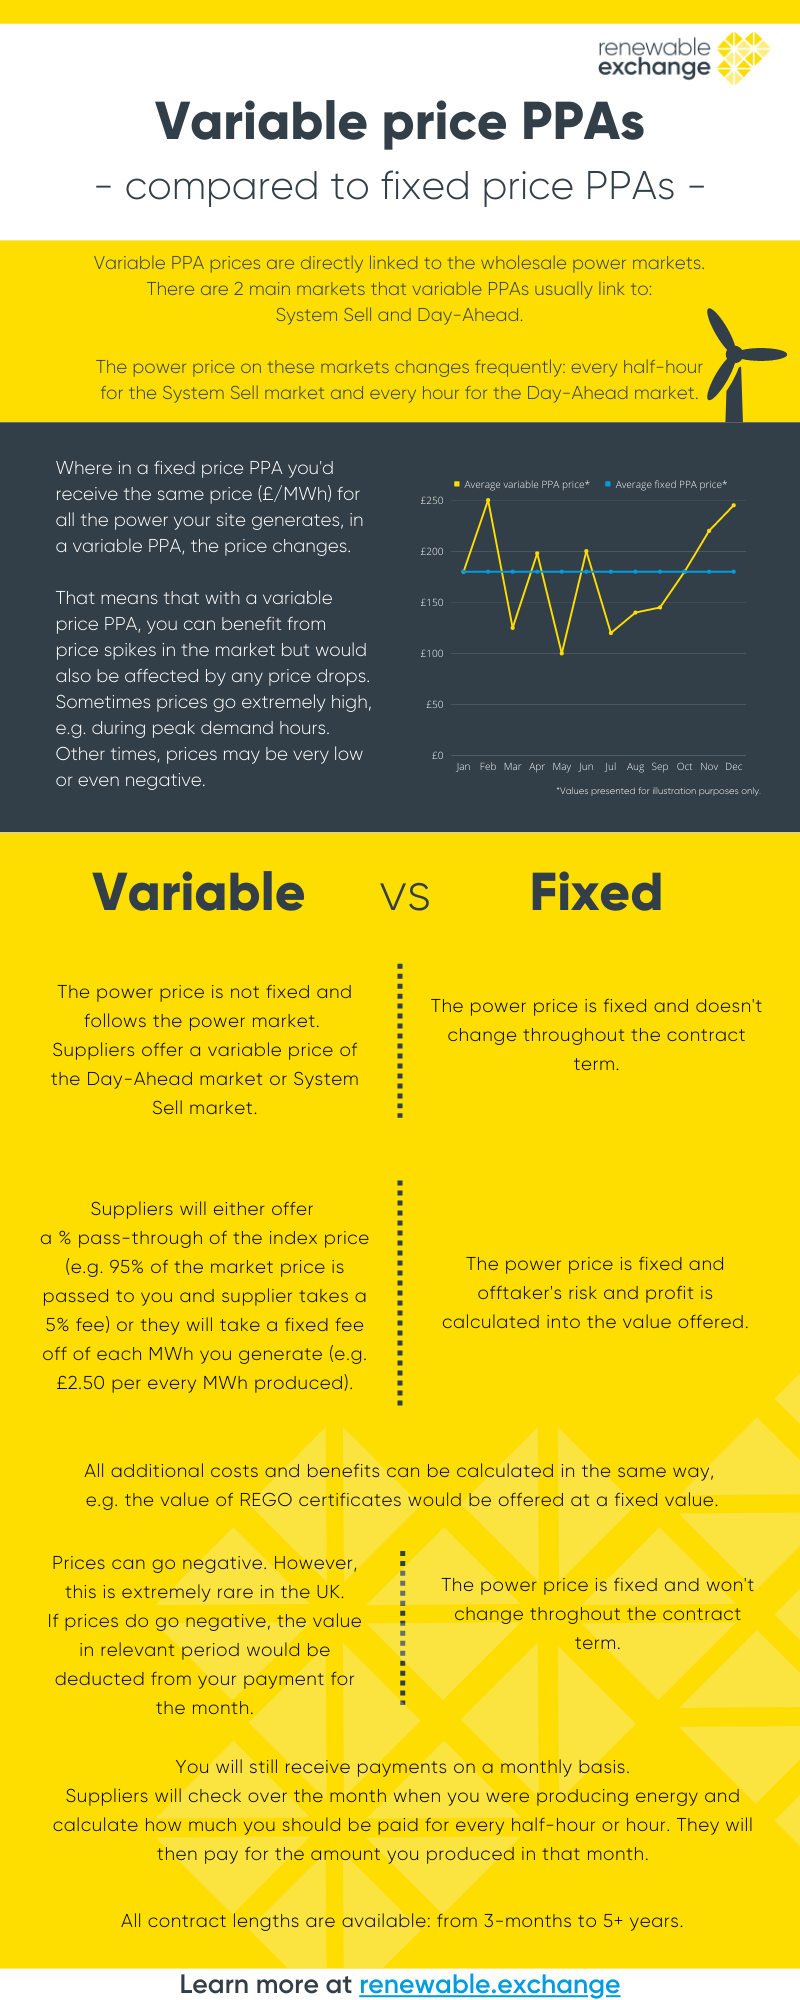 A comparison of variable and fixed price PPAs